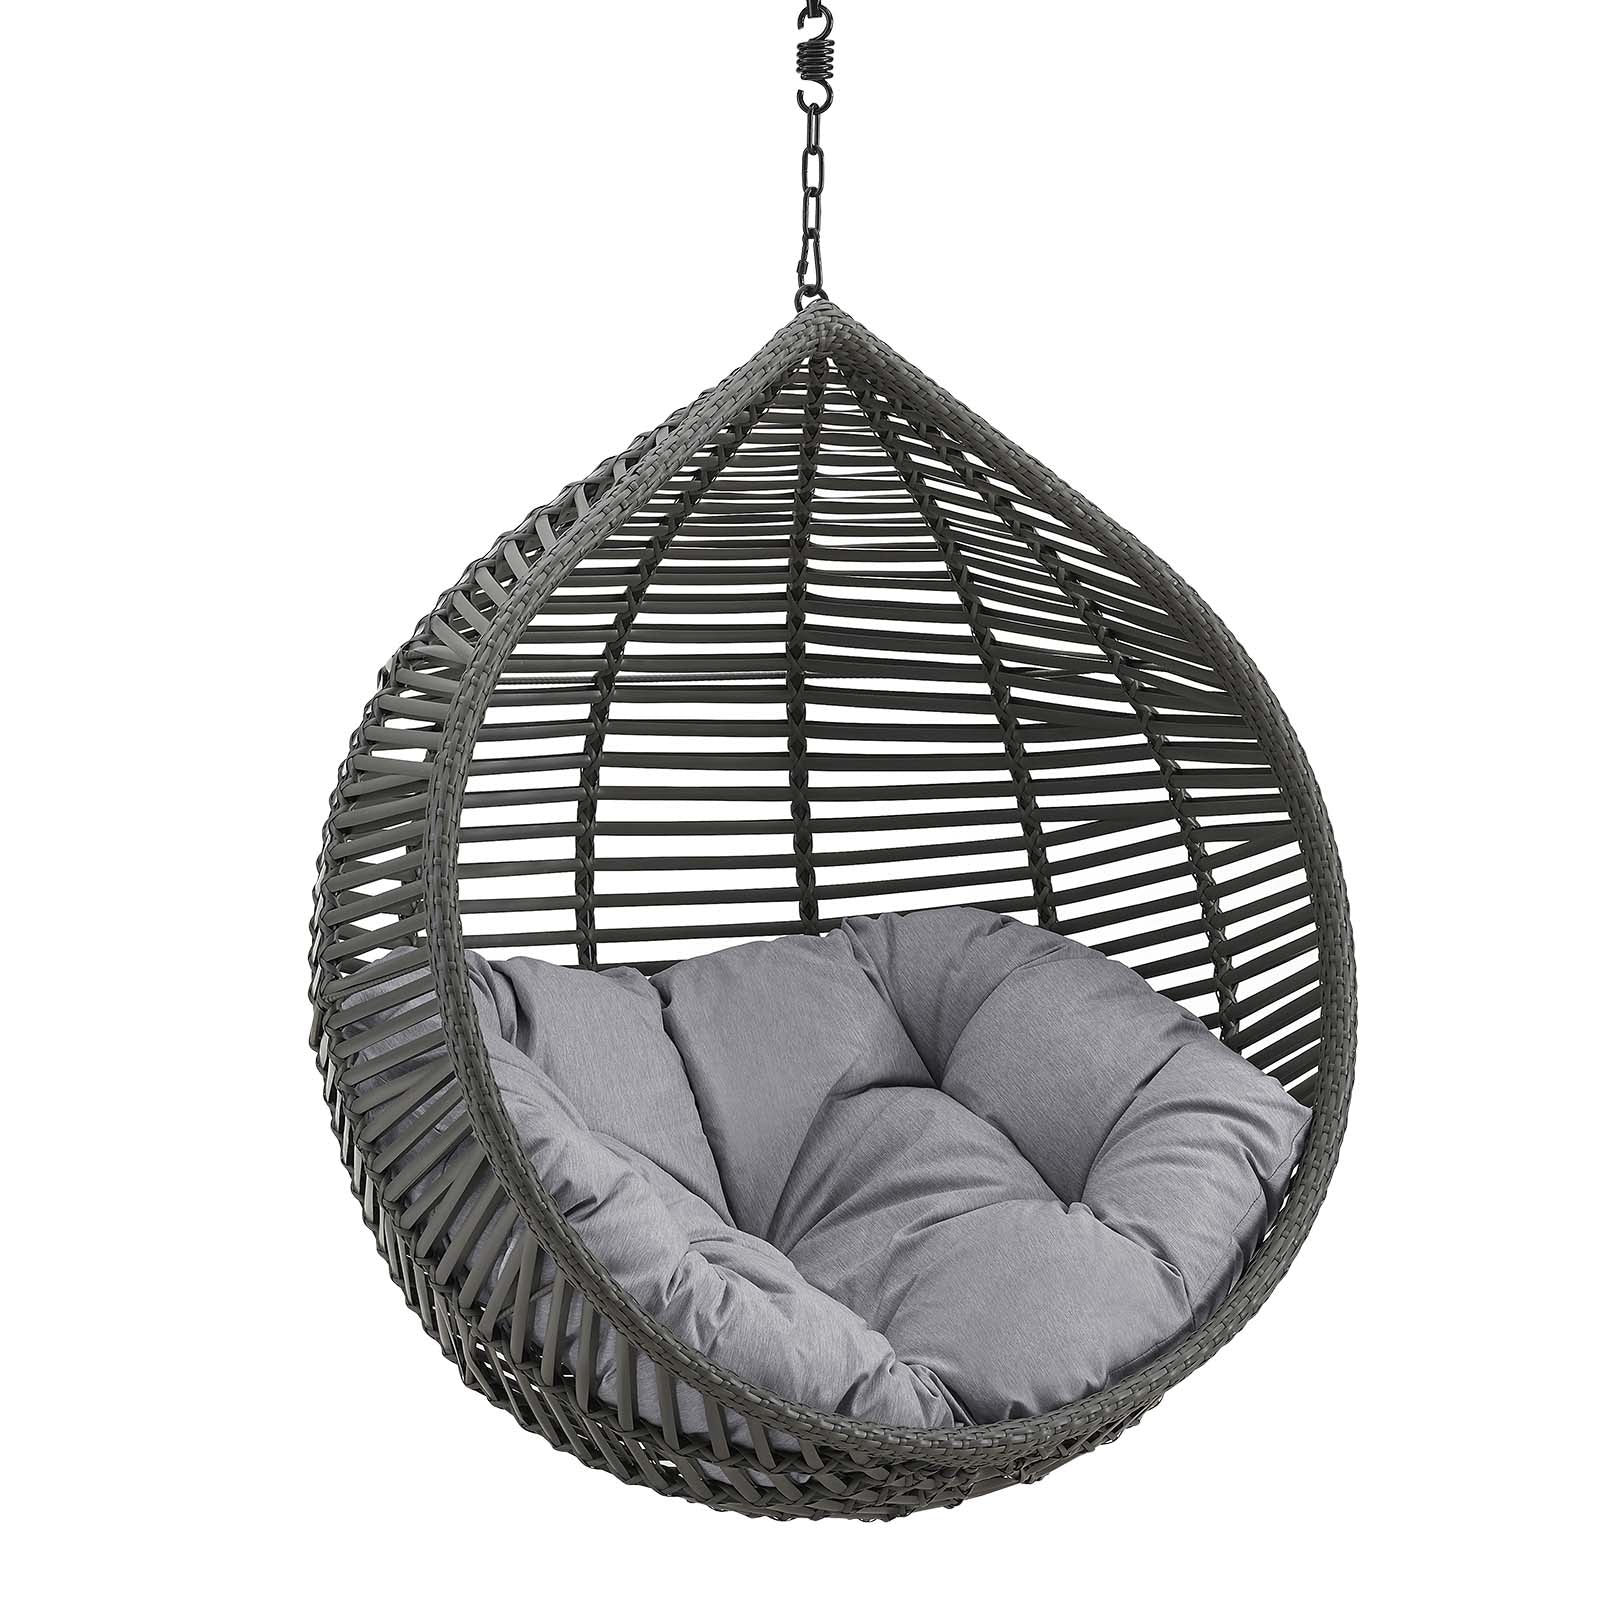 Garner Teardrop Outdoor Patio Swing Chair Without Stand - East Shore Modern Home Furnishings